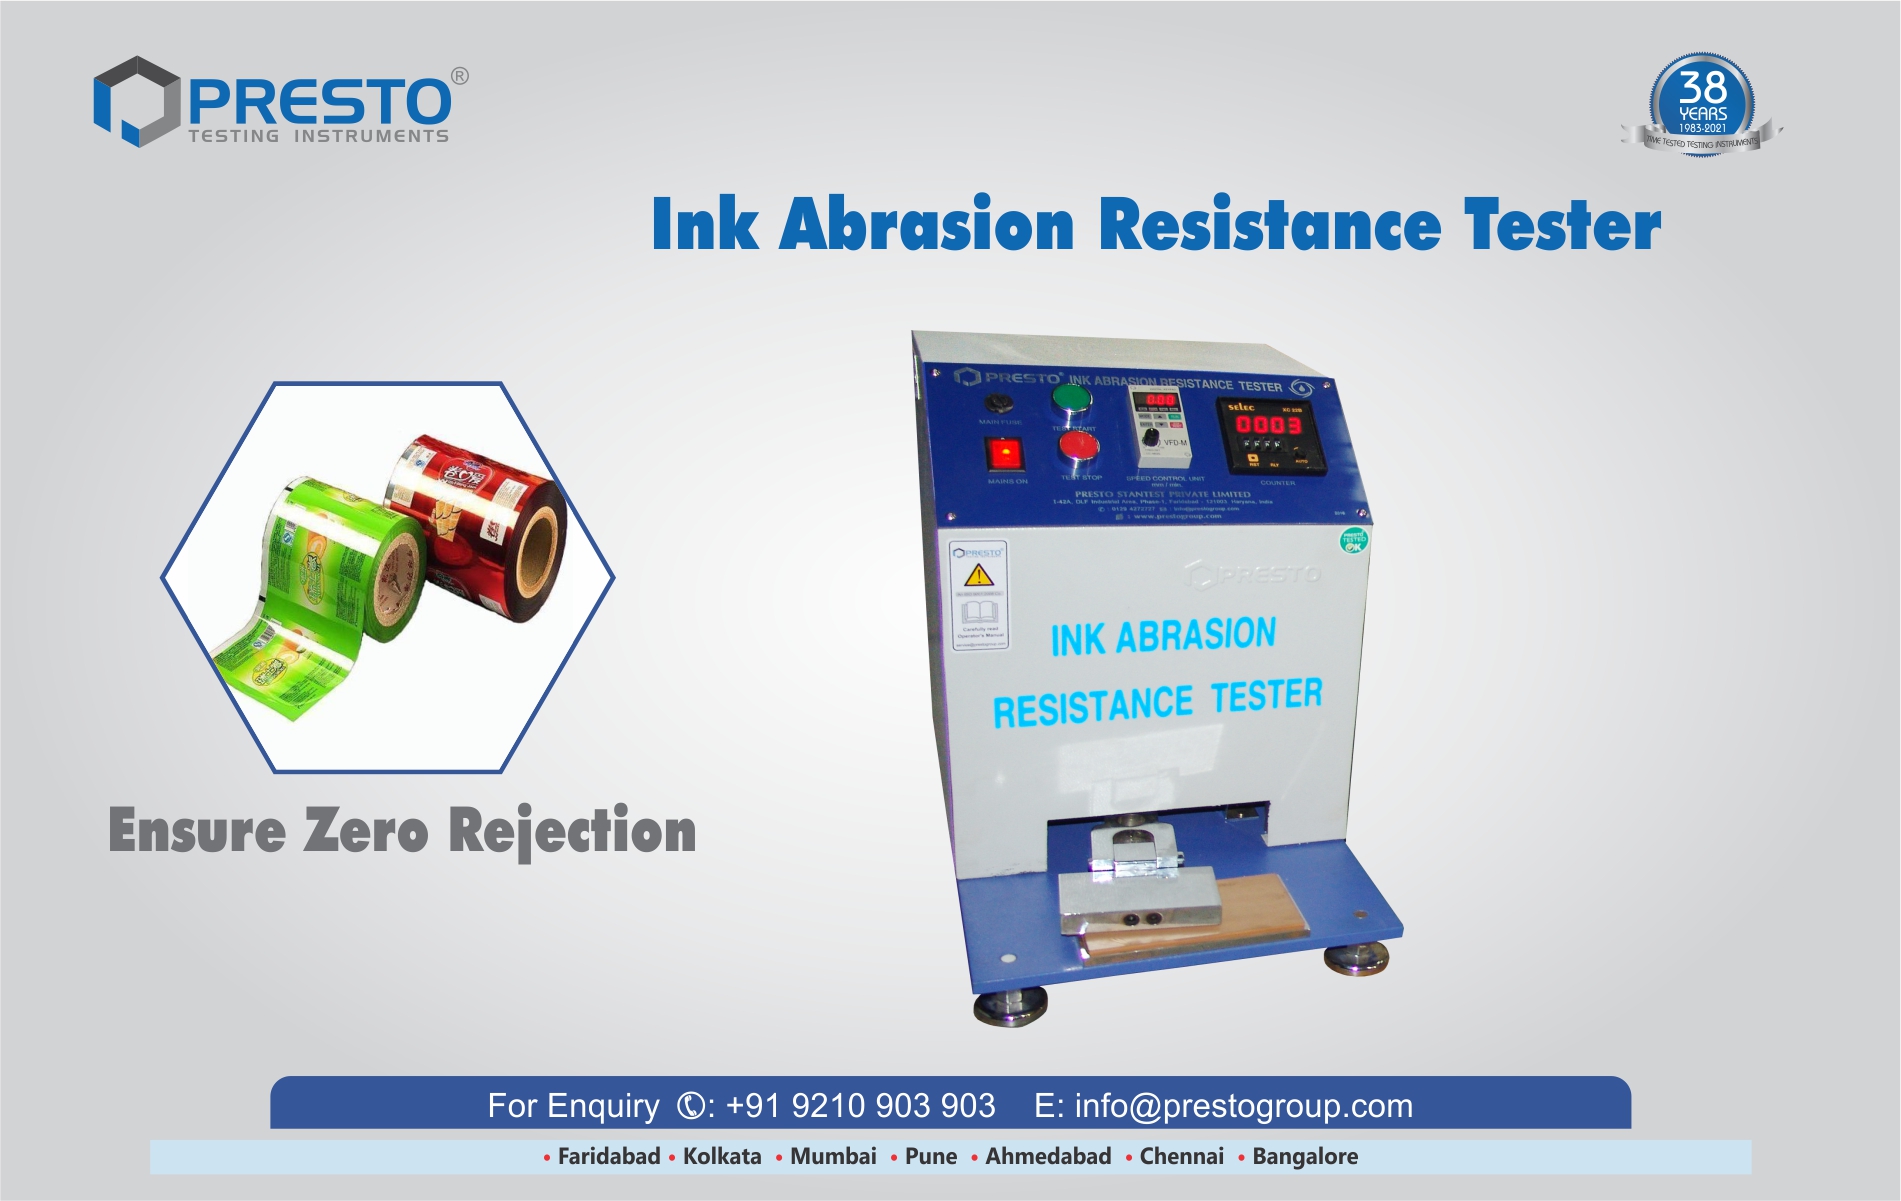 Ink Abrasion Resistance Tester for Printing Quality